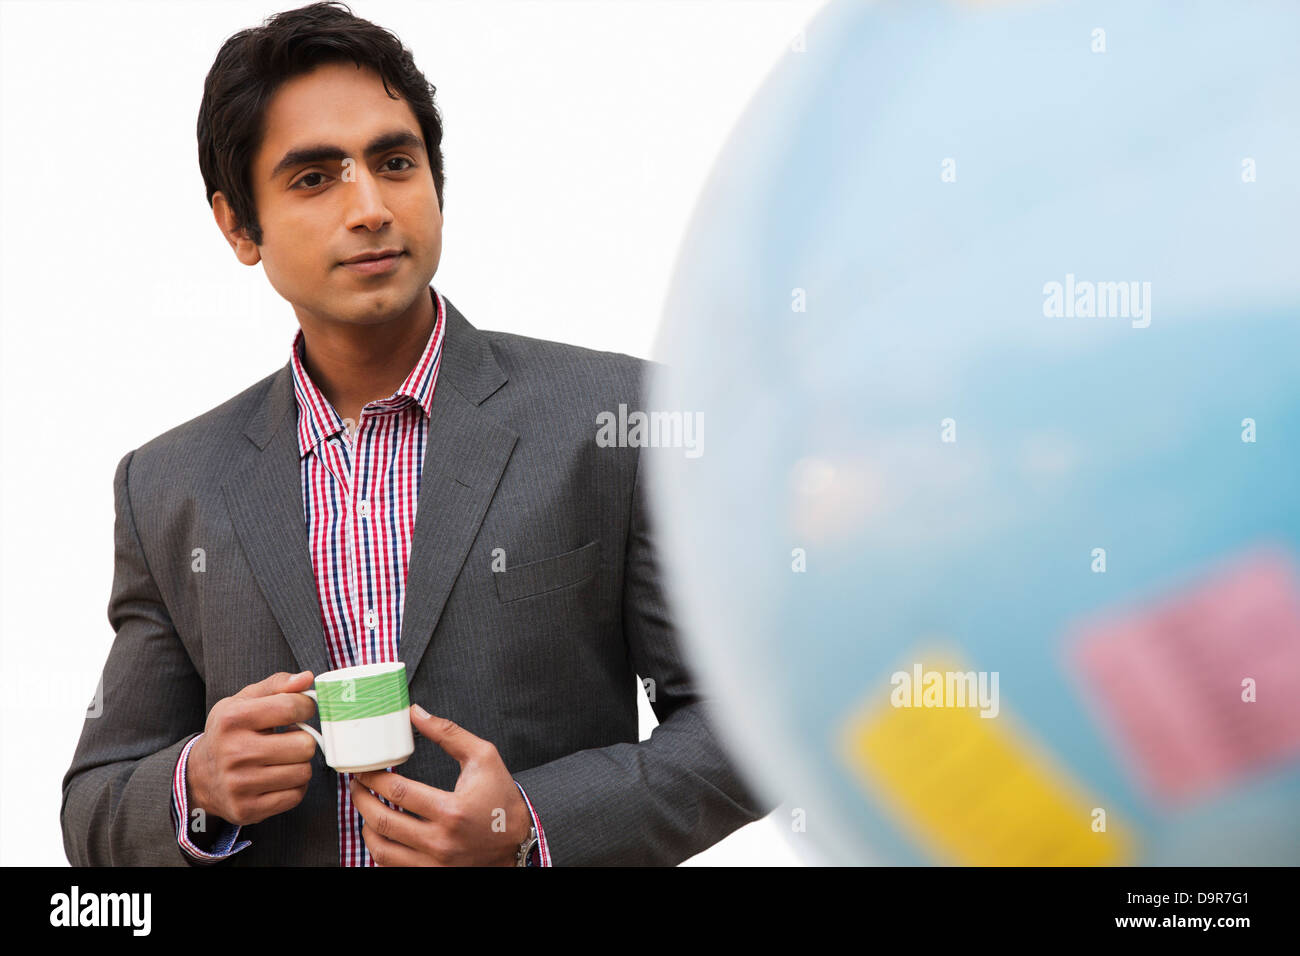 Businessman holding a tea cup and looking at a globe Stock Photo